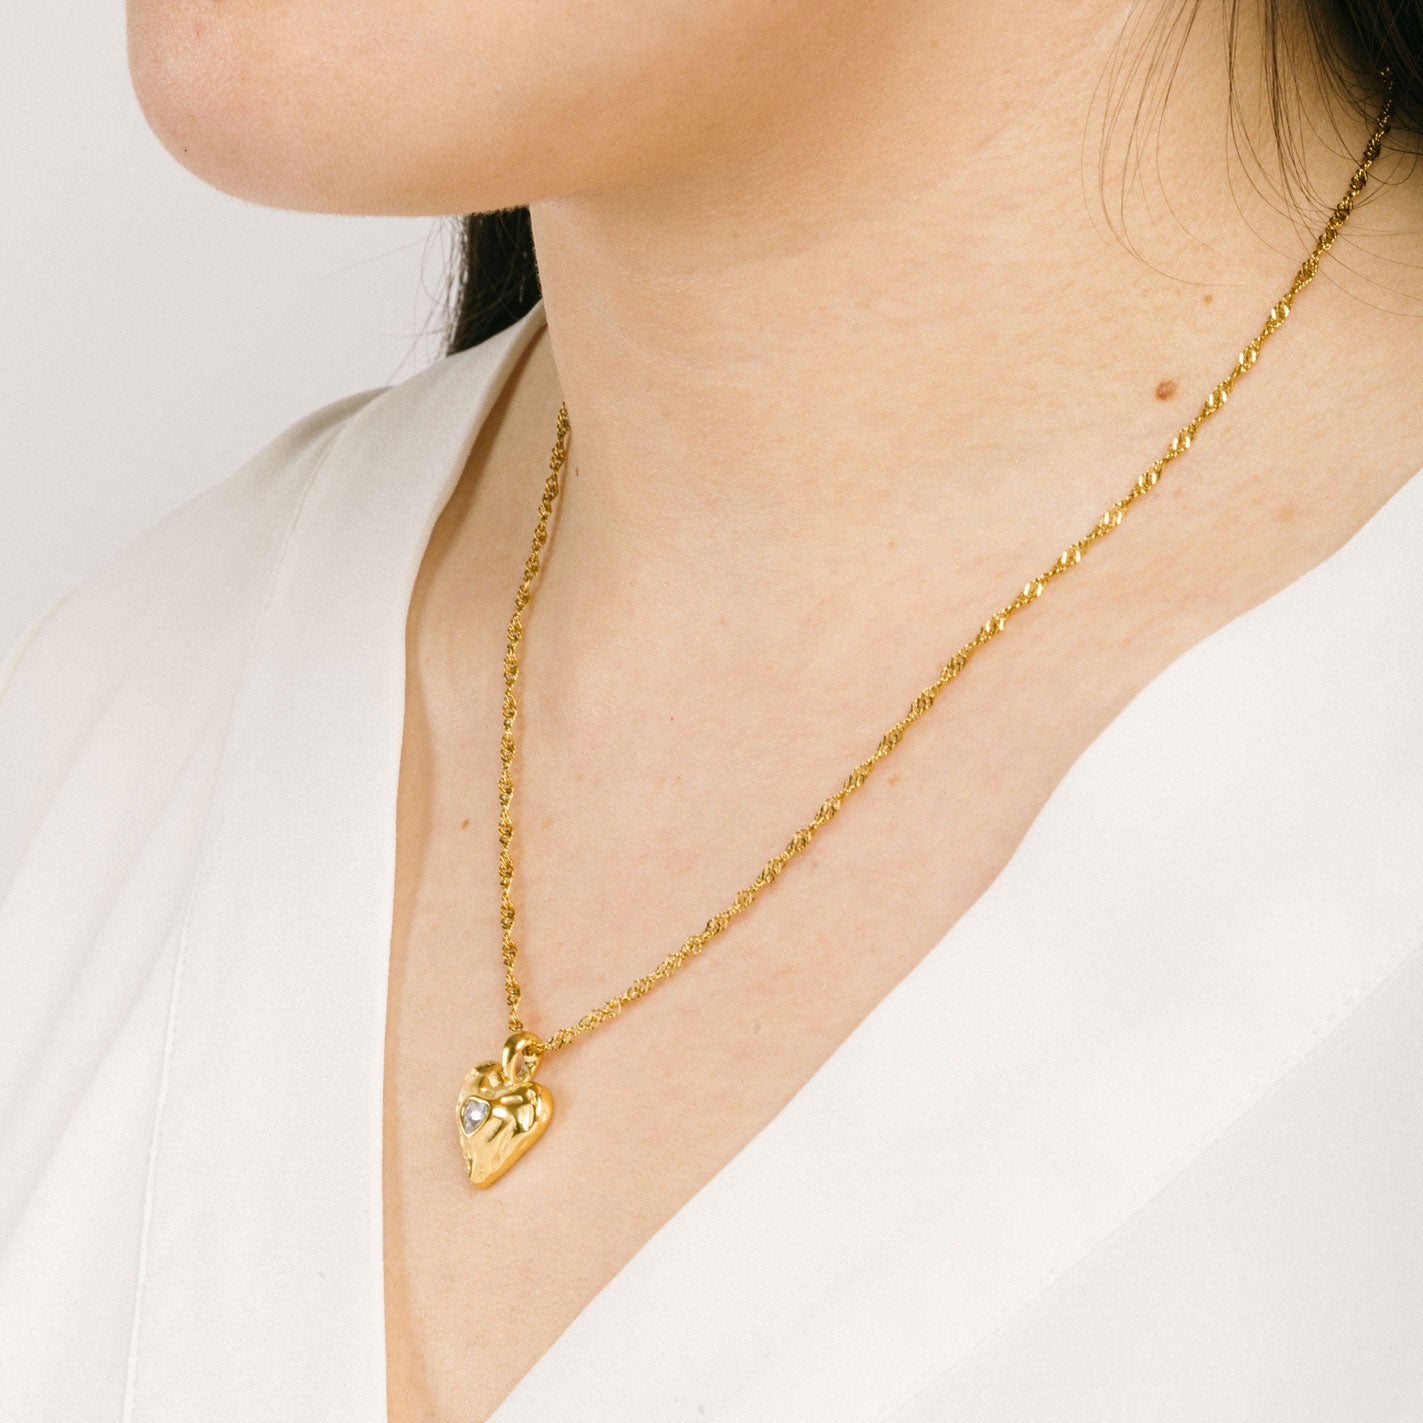 A model wearing the Textured Heart Pendant Necklace is crafted from 14K Gold Plated Stainless Steel with a Cubic Zirconia stone, and is non-tarnish, water resistant, and free from Lead, Nickel, and Cadmium. It is also adjustable and has only one necklace included.